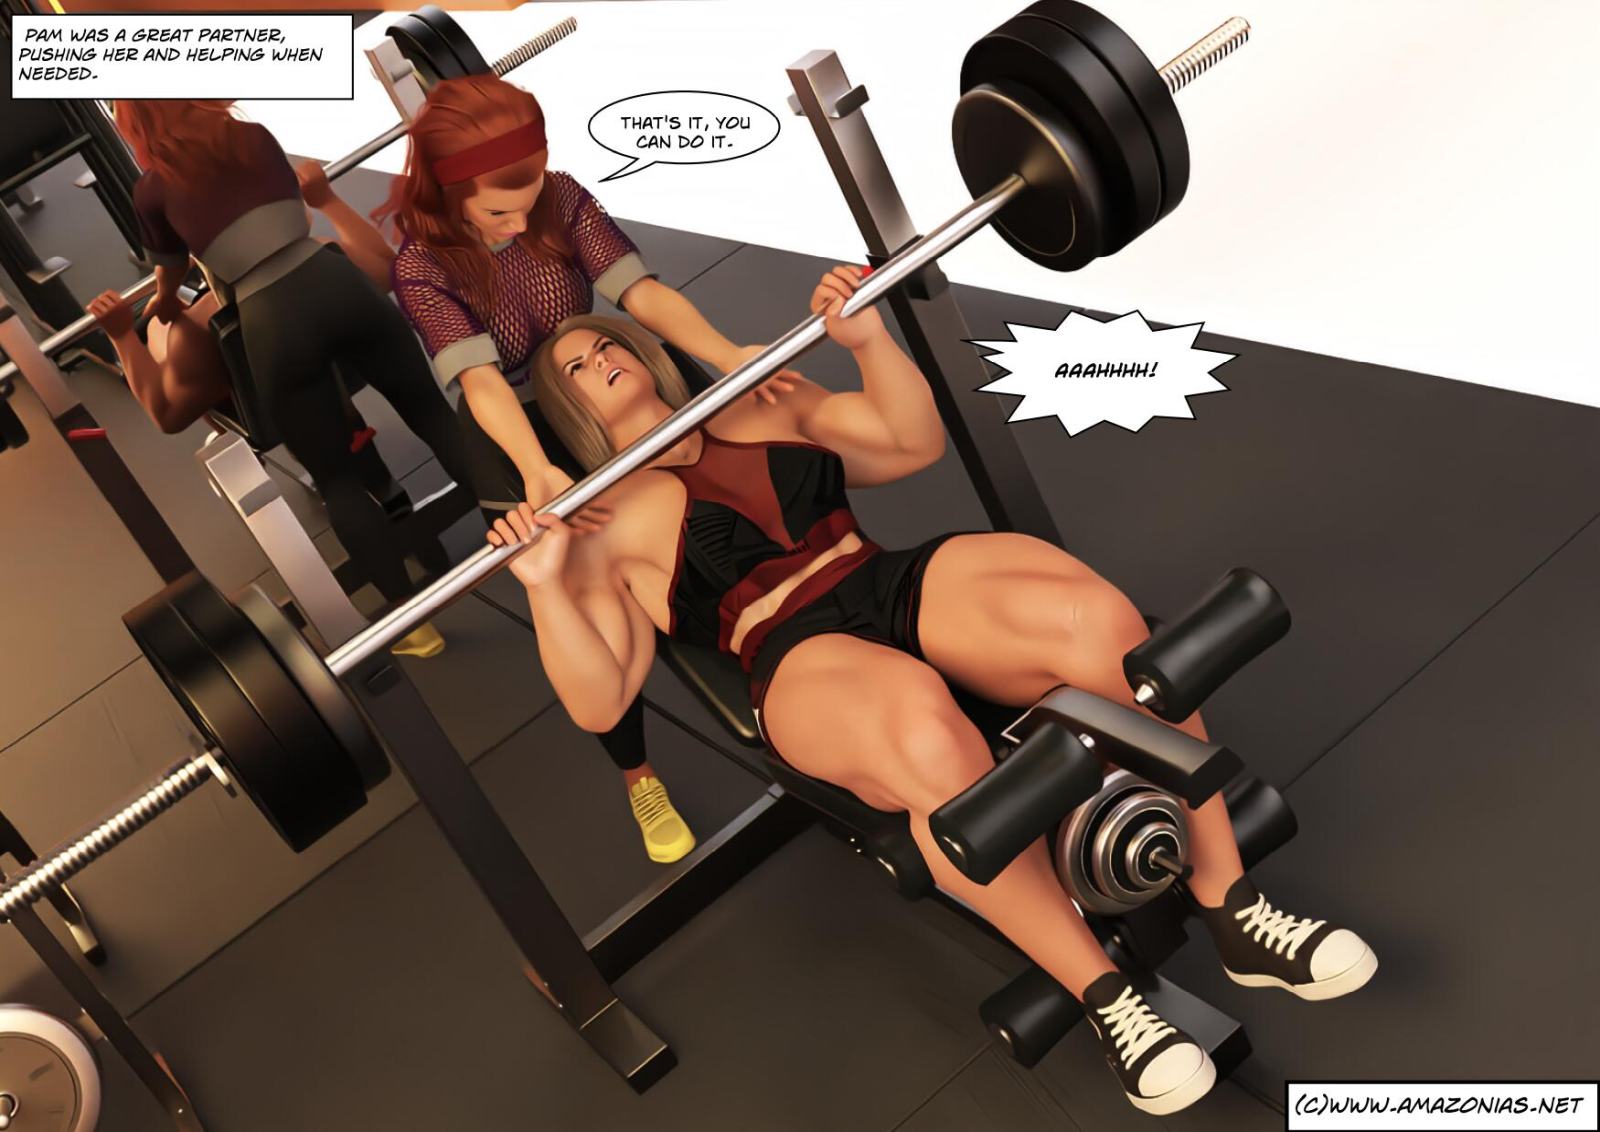 girl lifting weights in gym